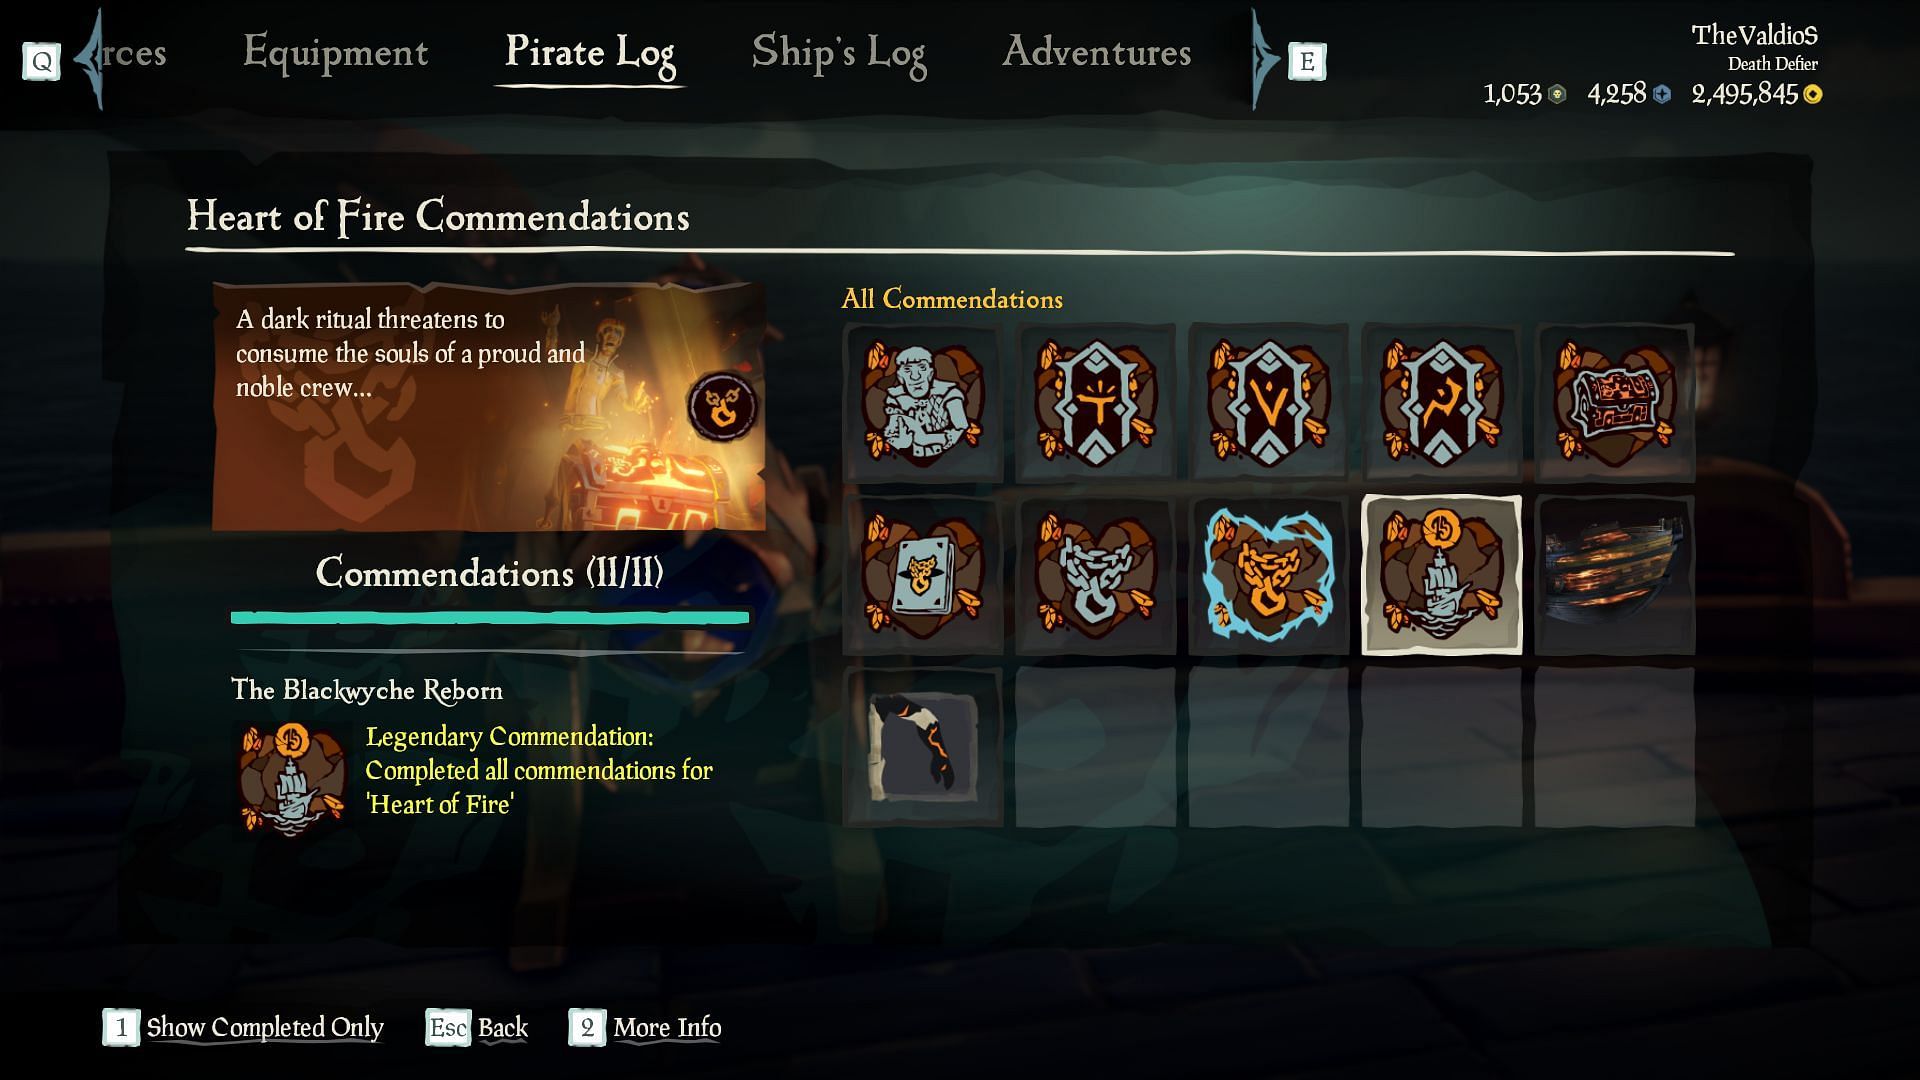 The Blackwyche Reborn commendation is unlocked after you complete the quests. (Image via Rare)